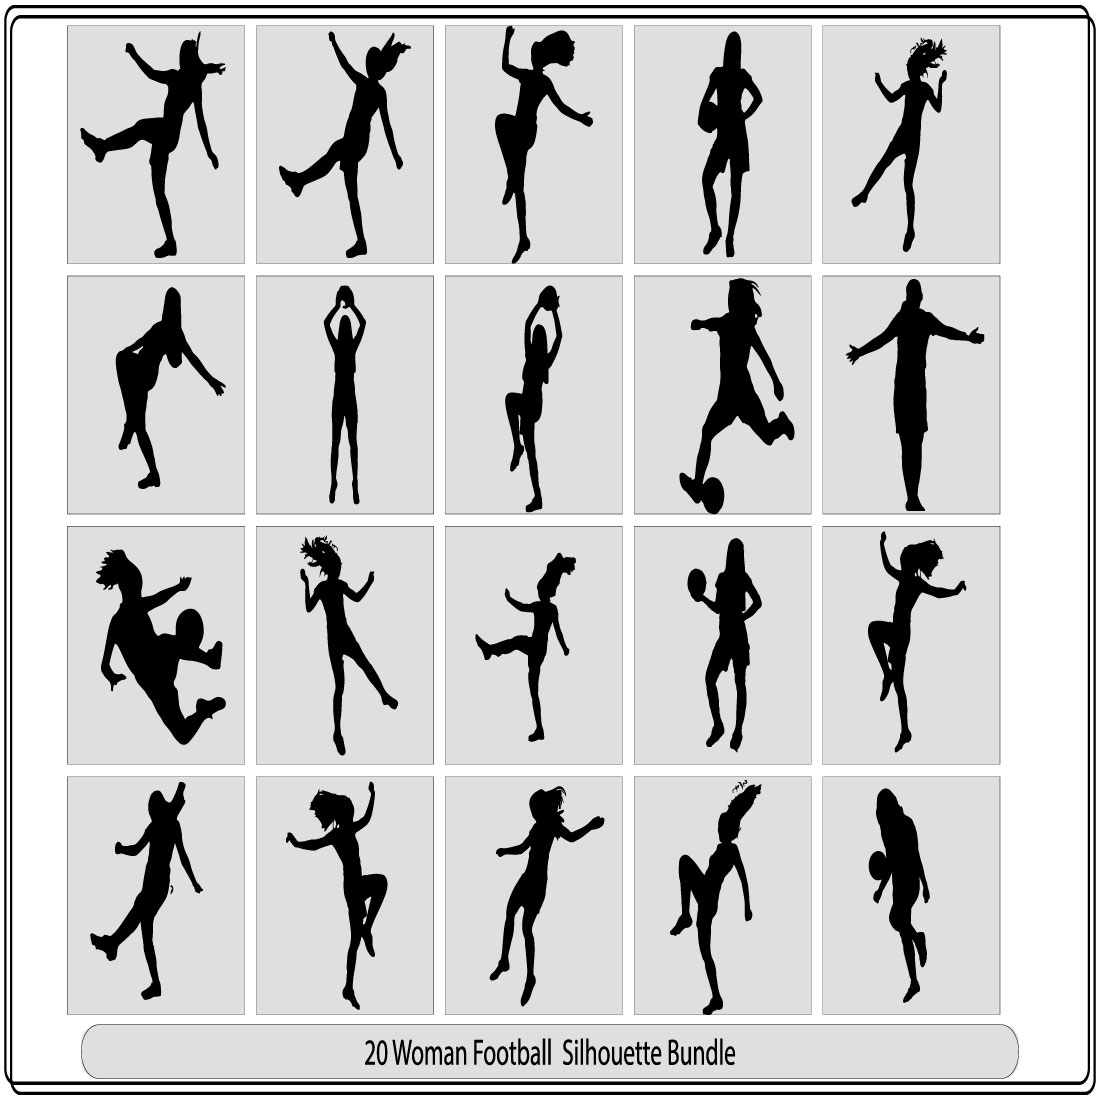 Woman's Soccer, Front View Sport Silhouette,Silhouette of a woman soccer player kicking ball preview image.